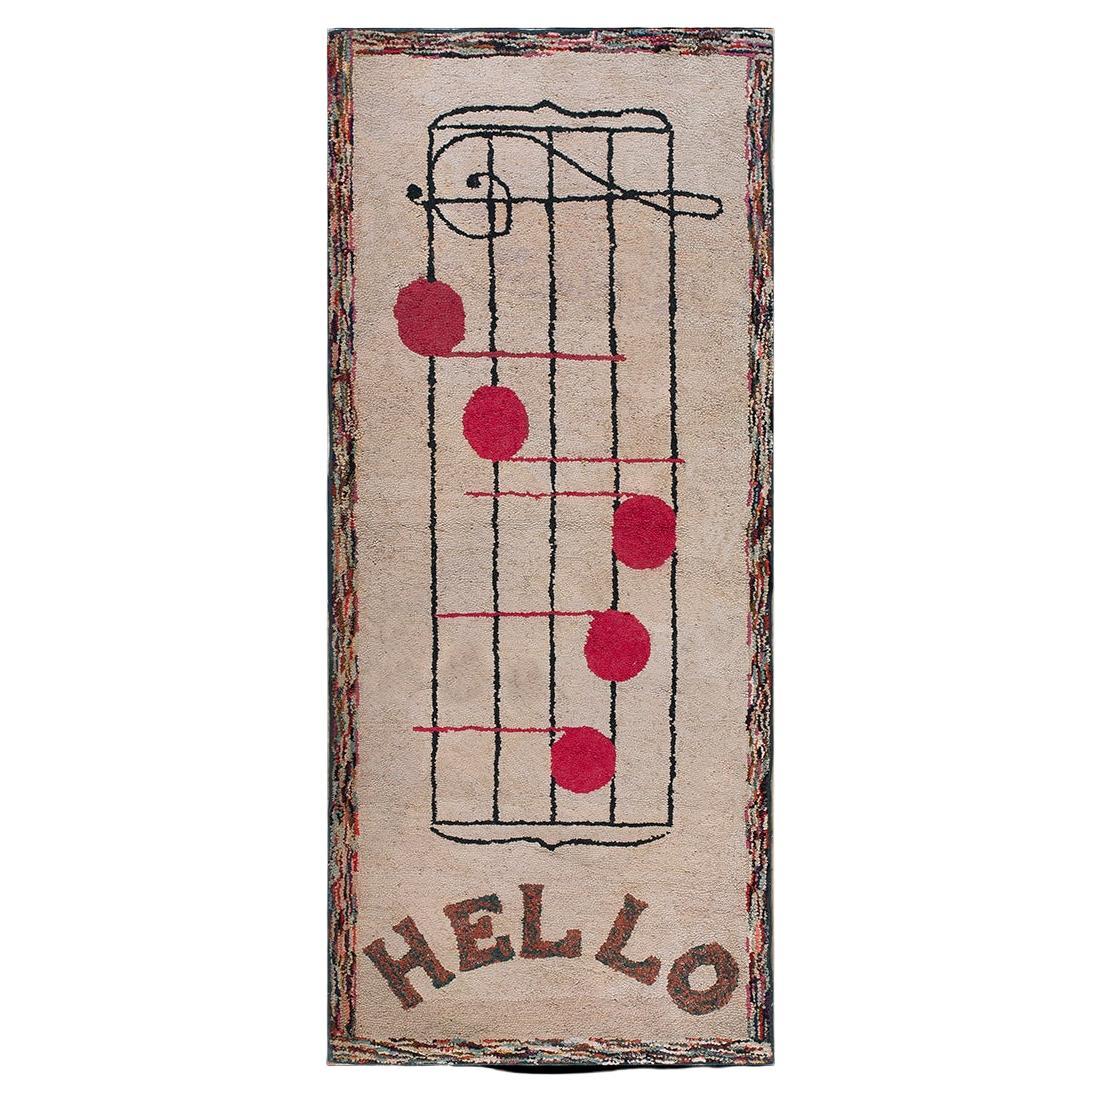 Early 20th Century American Hooked Rug  ( 3' x 7'5" - 91 x 226 ) For Sale